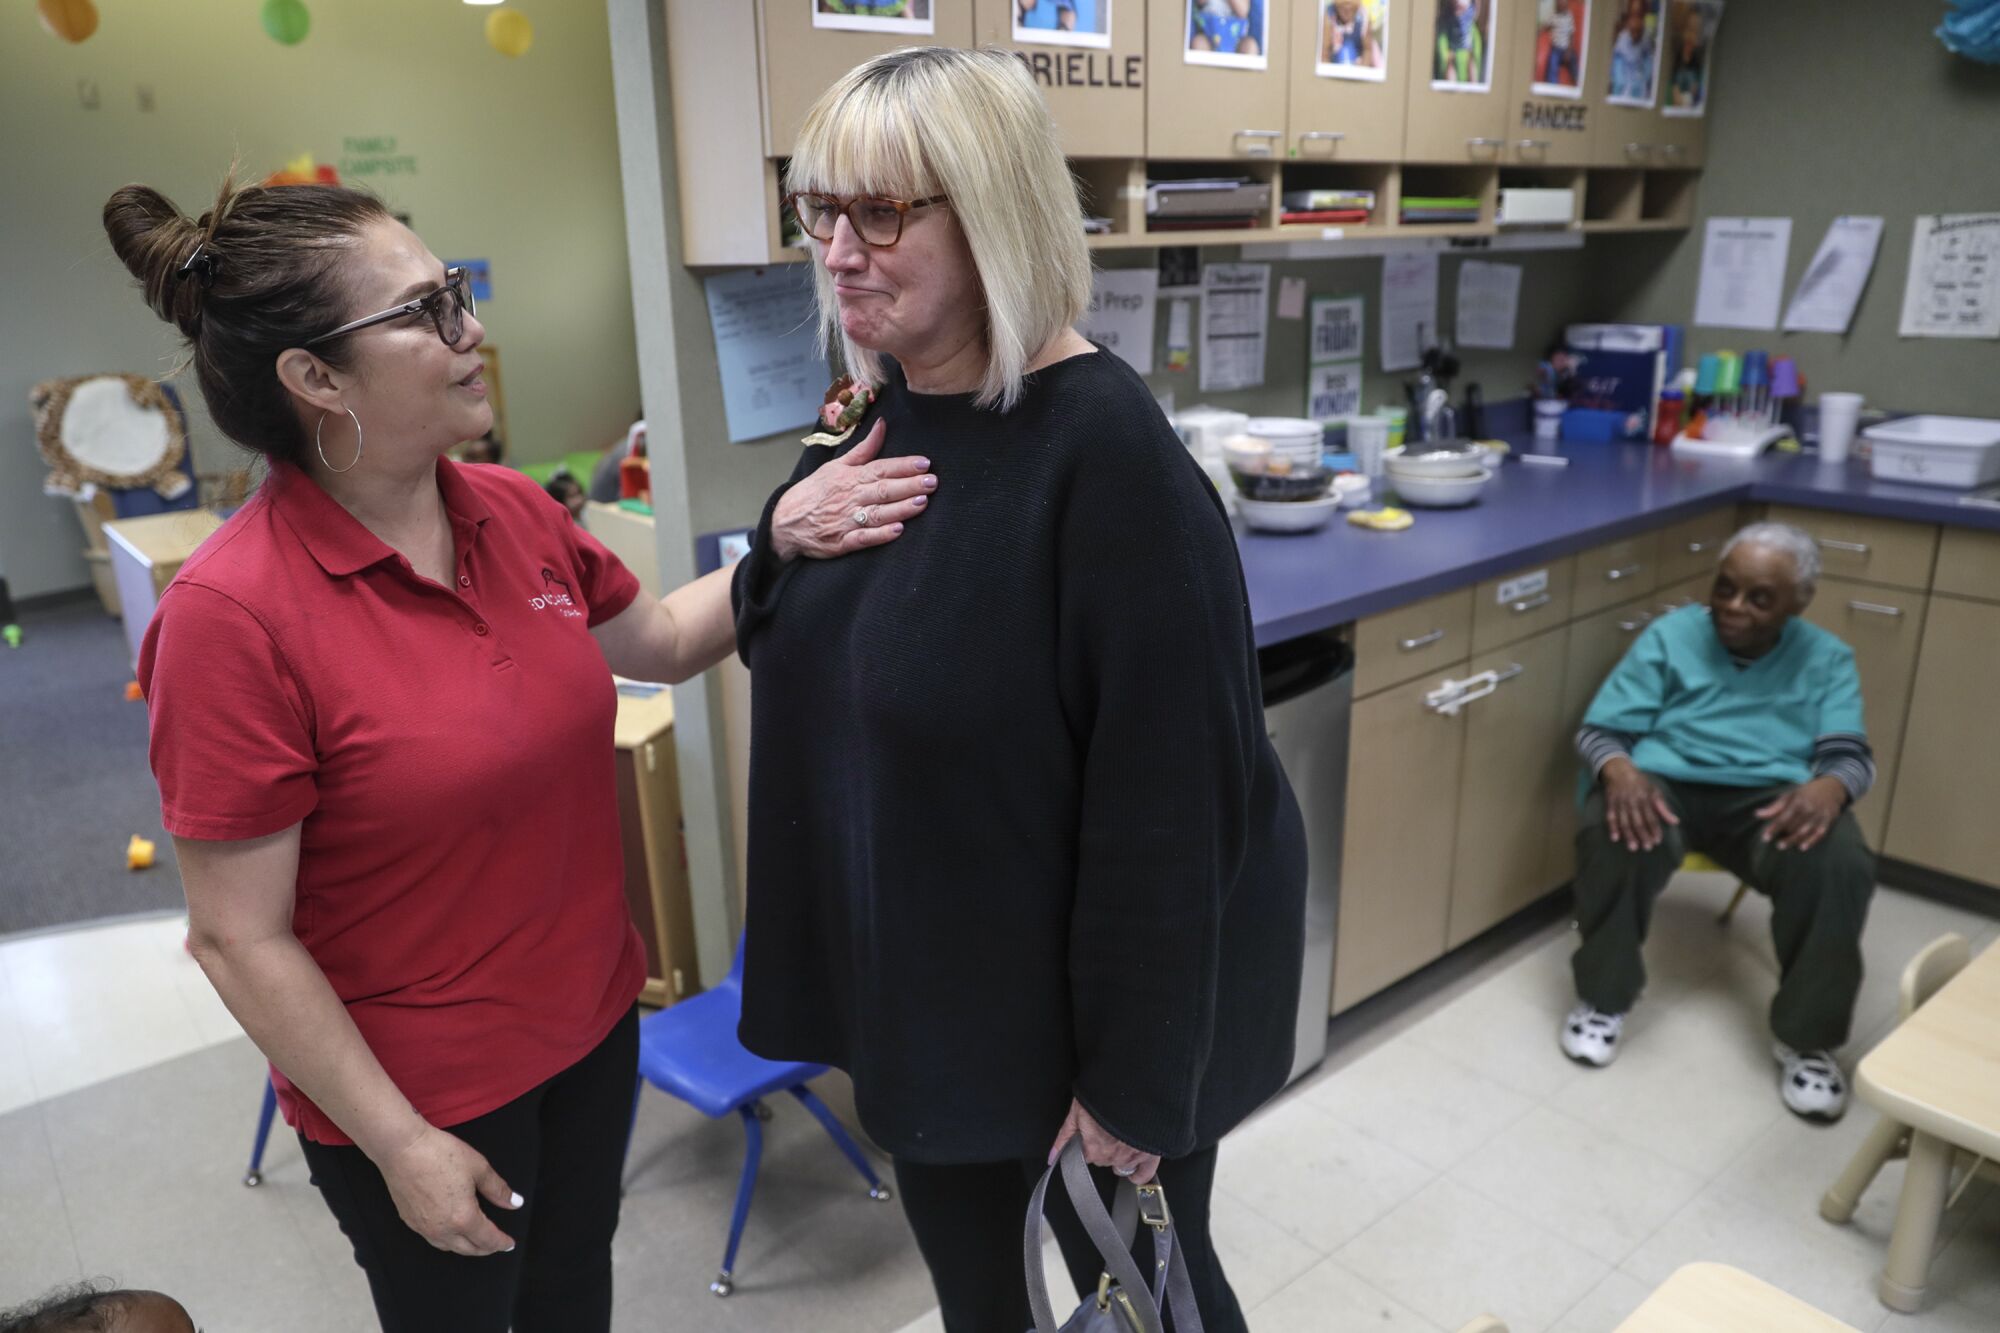 Susie Buffett humbly accepts gratitude from Veronica Montero Lucero, a teacher at Educare Omaha.